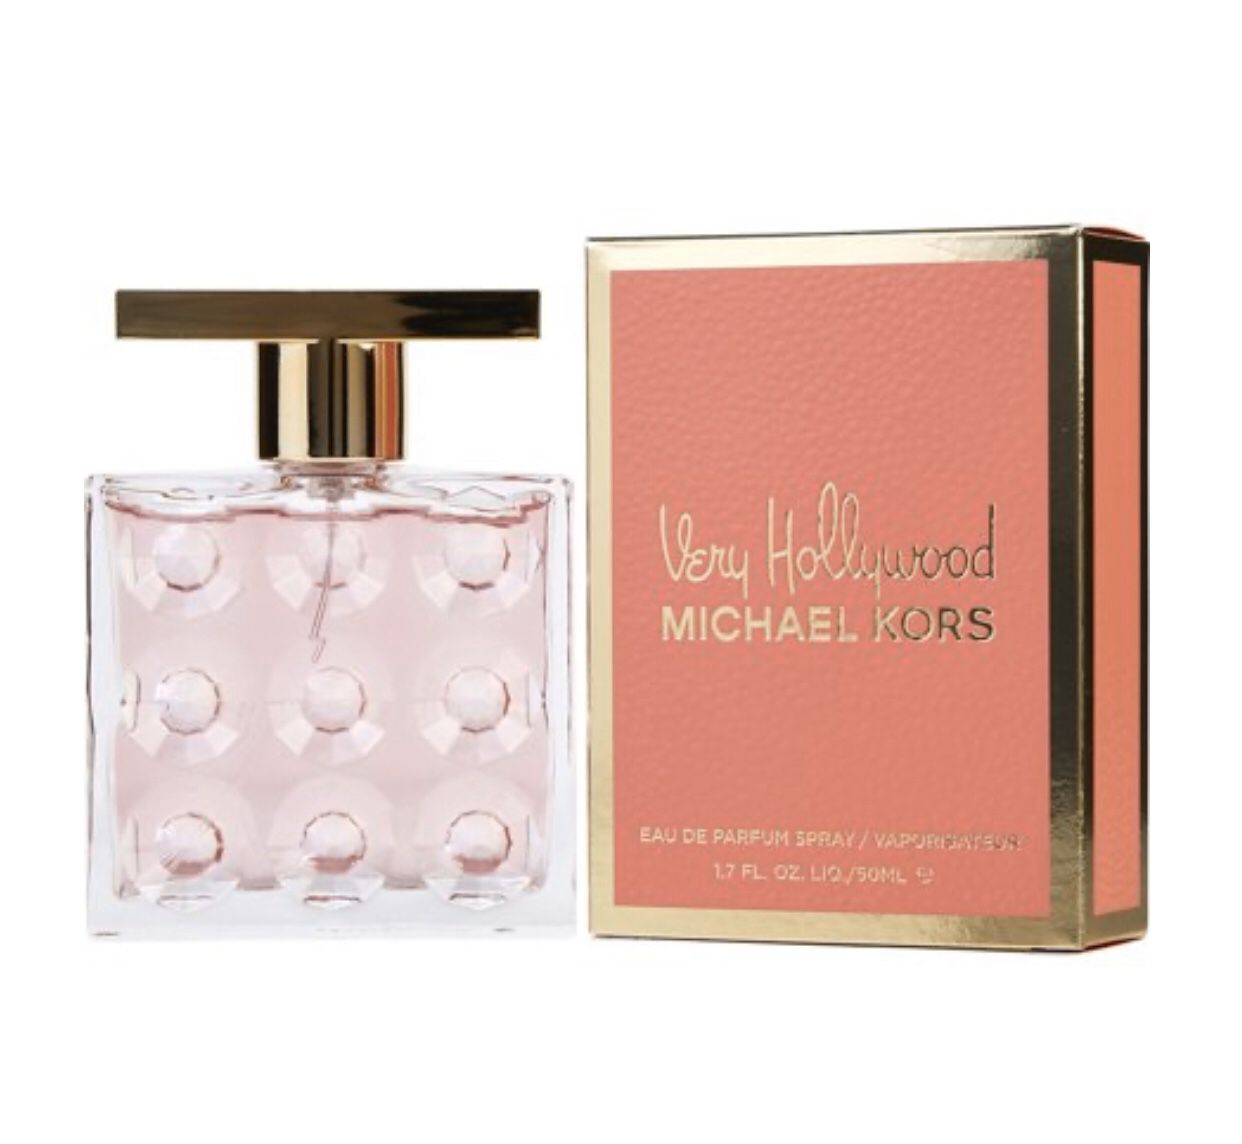 Brand New Very Hollywood perfume by Michael Kors